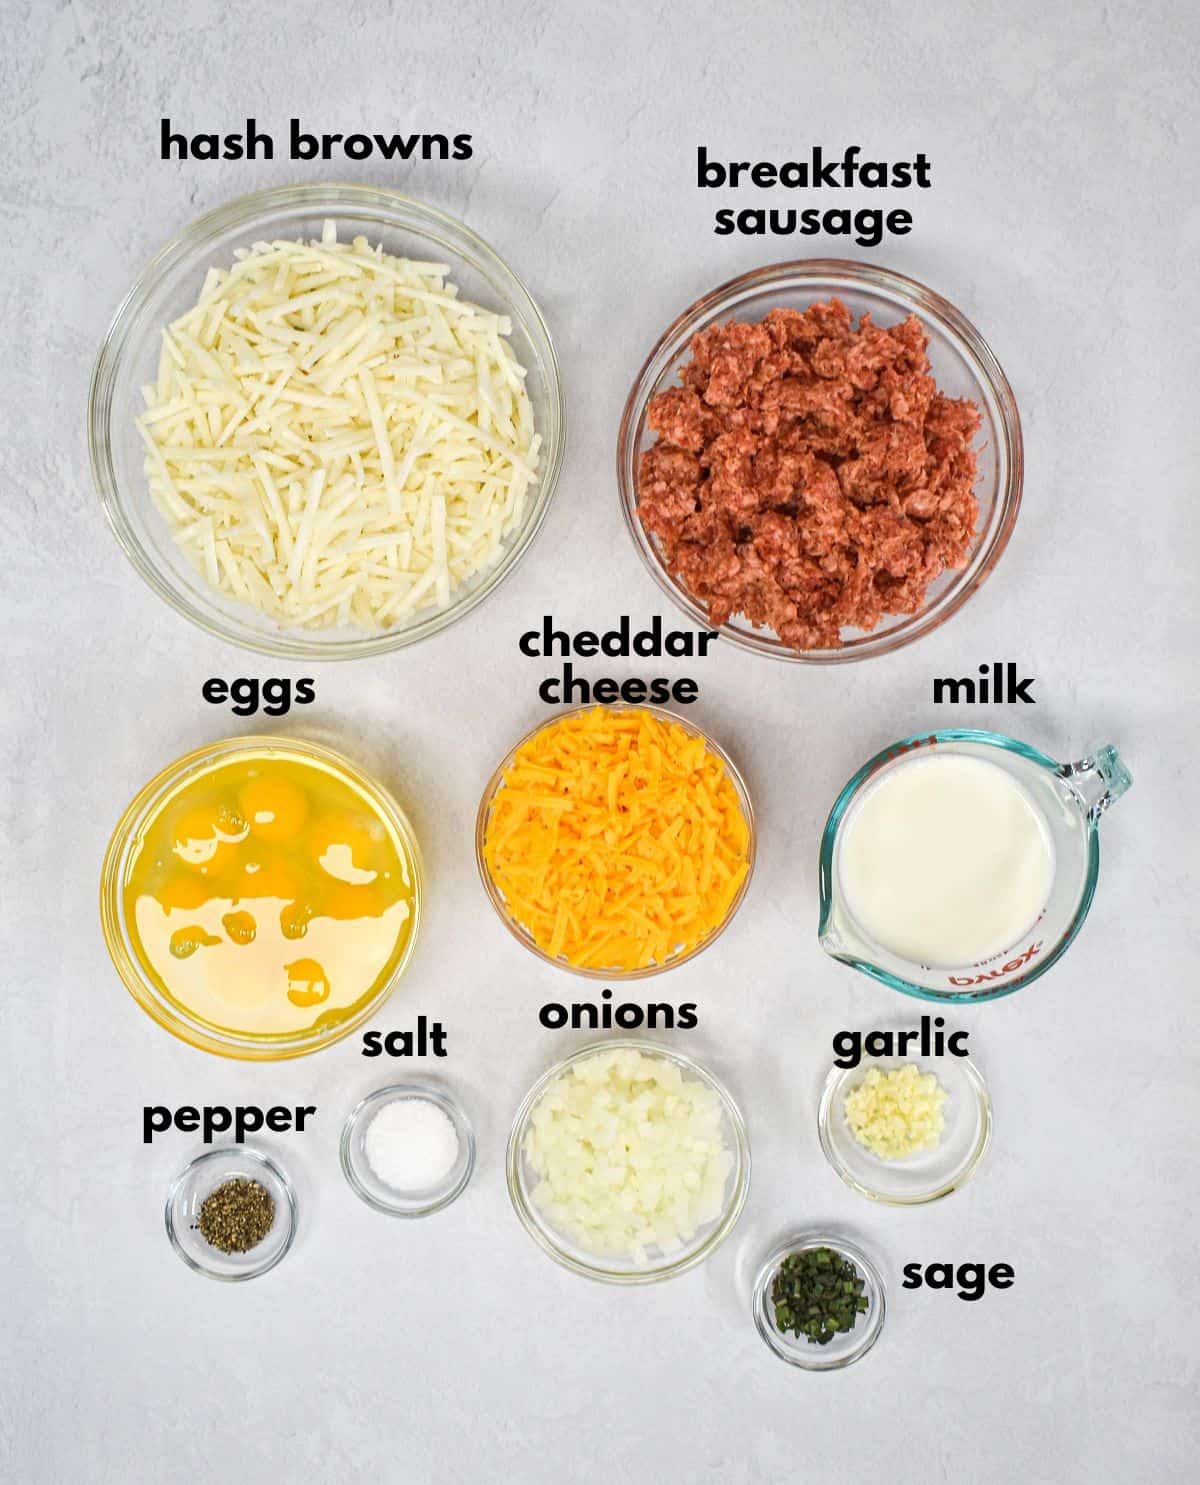 The ingredients for the breakfast casserole prepped and arranged in glass bowl on a white table with each labeled with small black letters.